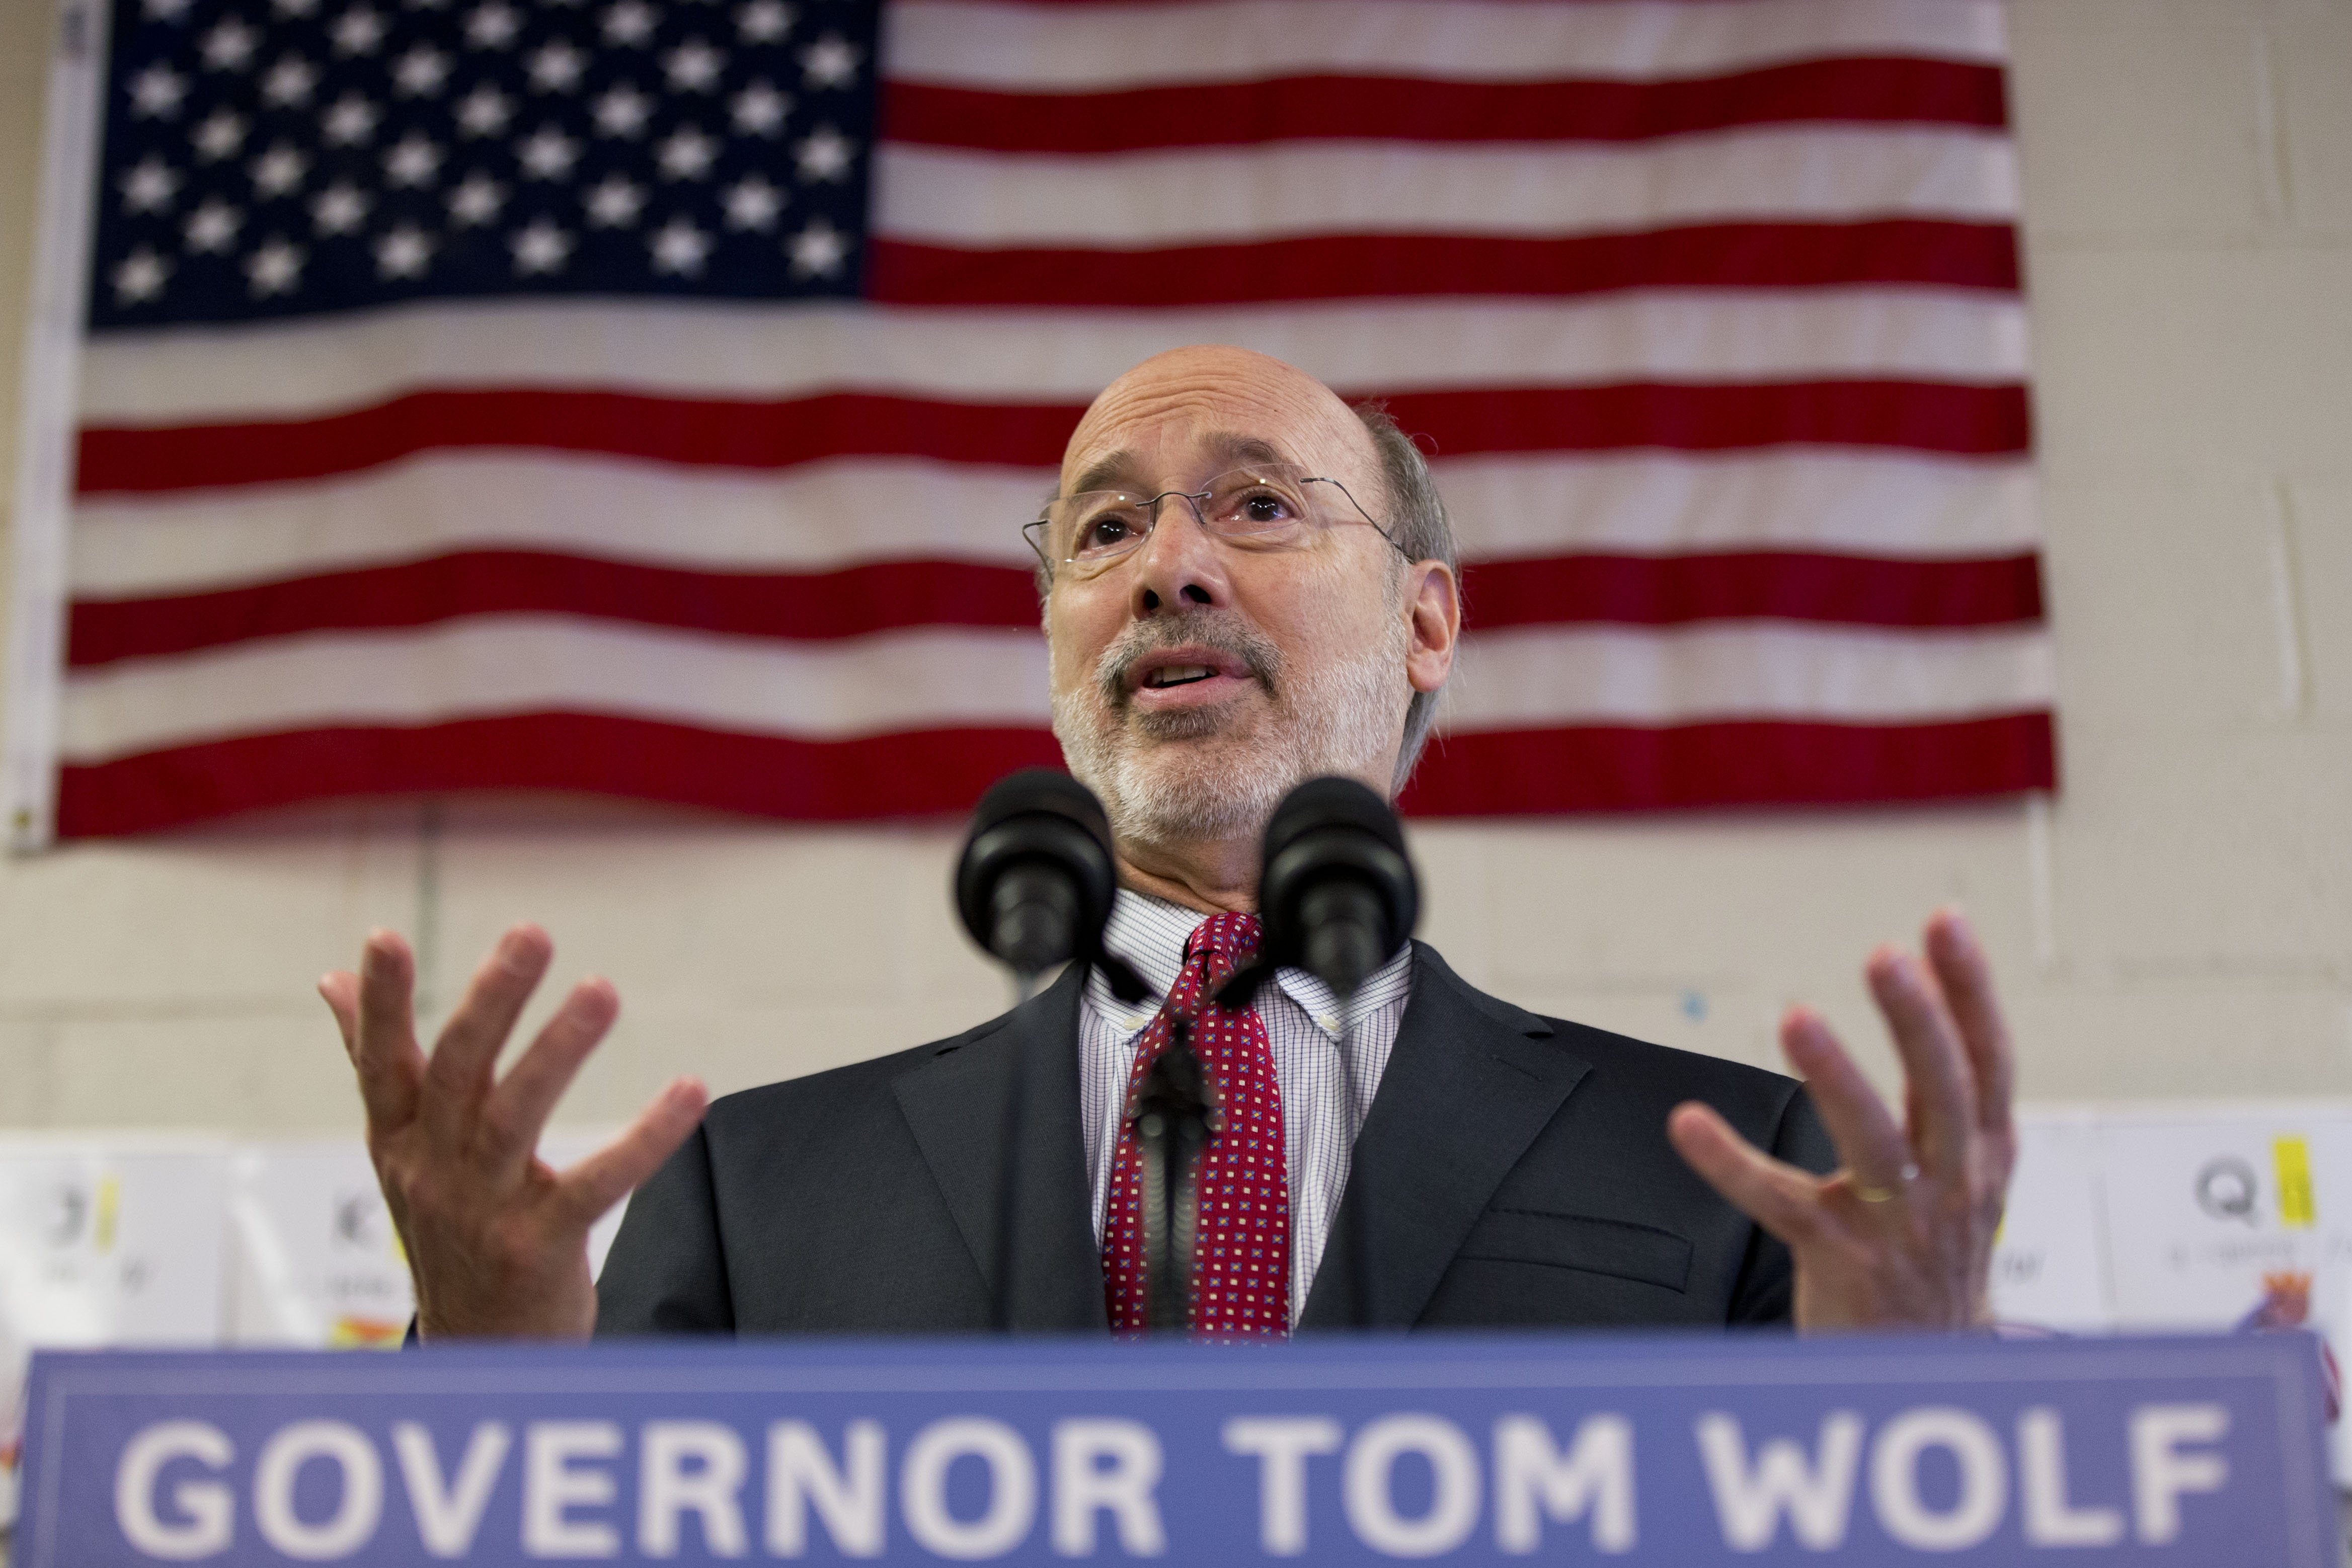 Gov. Tom Wolf Caln speaks during a news conference at Elementary School on Feb. 11, 2015, in Thorndale, Pa.